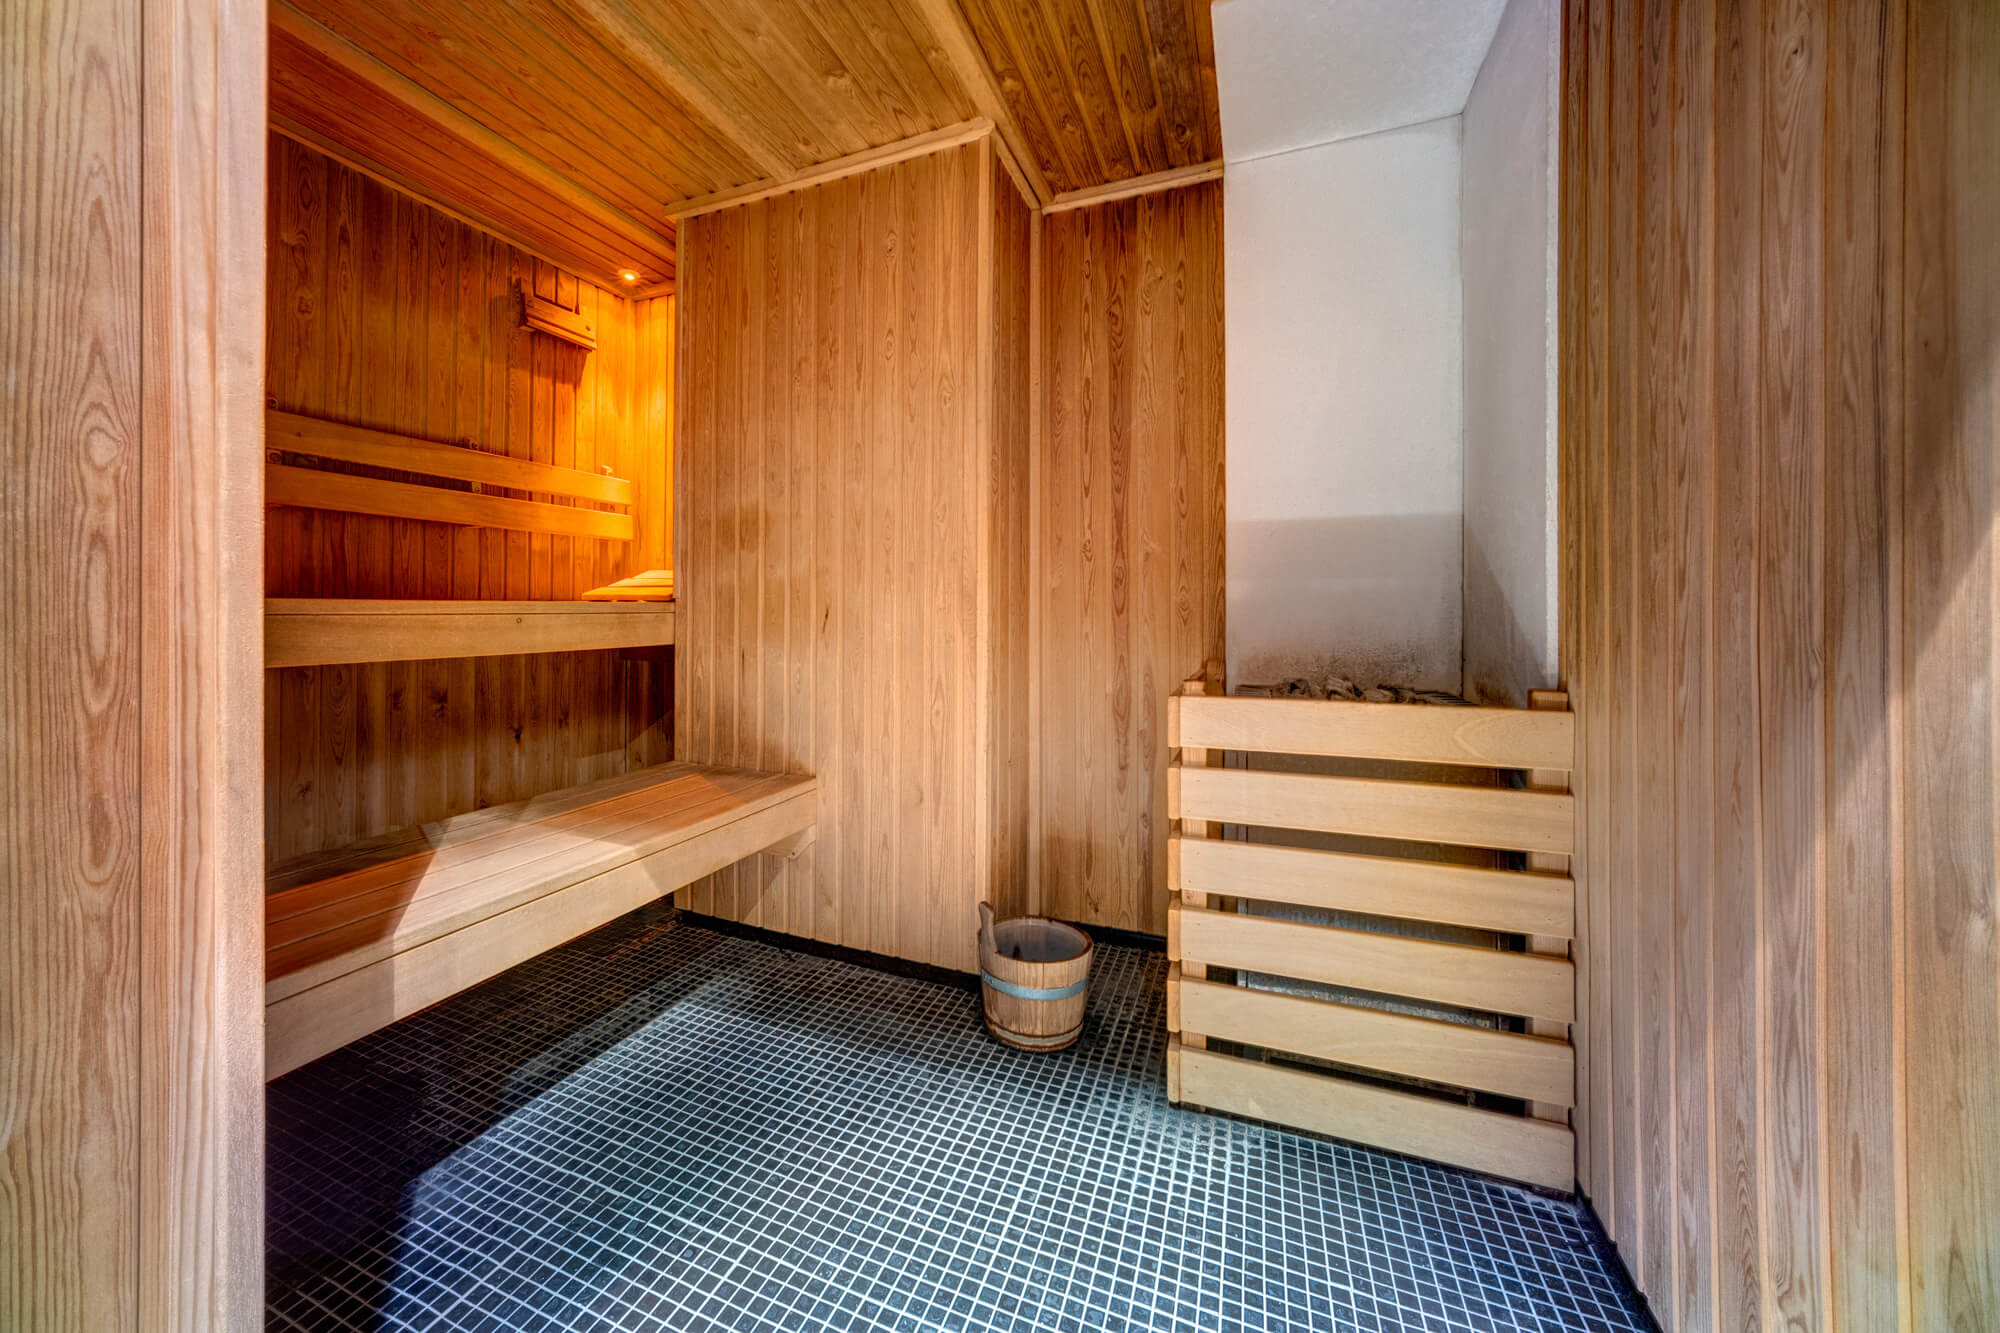 Sauna with blue and white floor tiles and wooden wall panels and seating